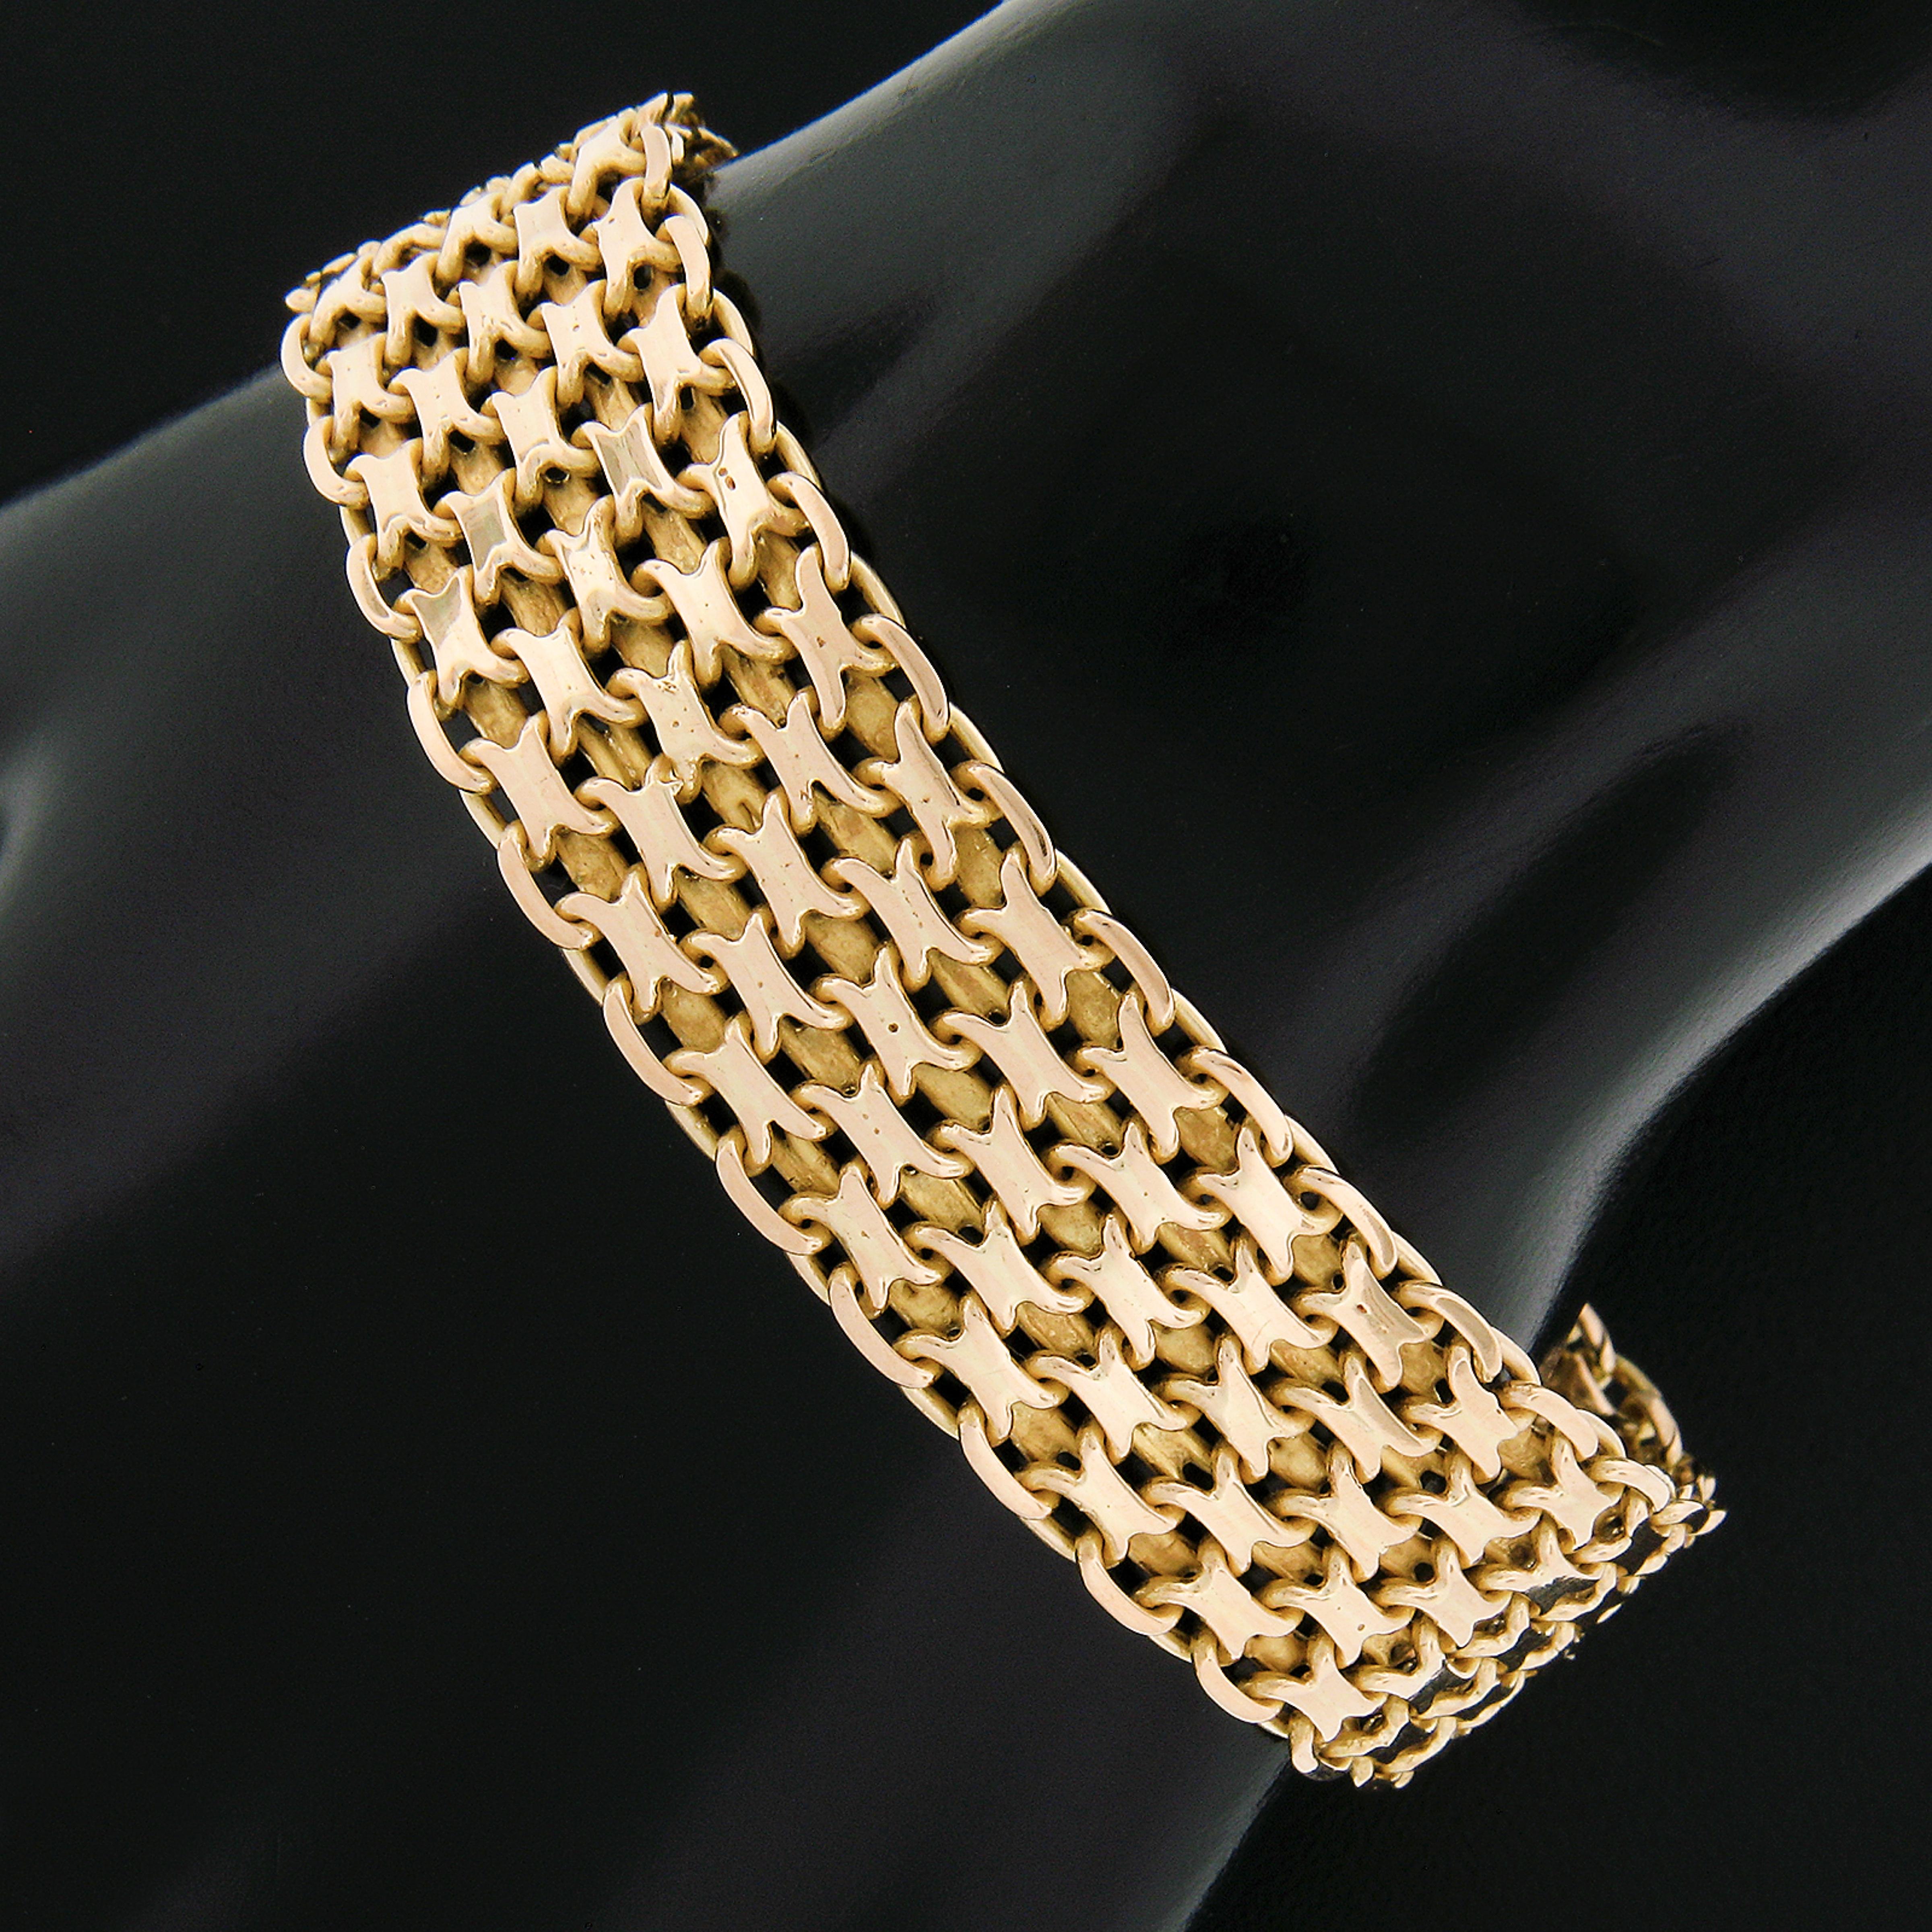 Here we have a very well made link bracelet that was crafted from solid 18k yellow gold. An impressive version of a classic link - solid and well made! This bracelet remains in a excellent condition and is ready to impress and turn heads. Enjoy